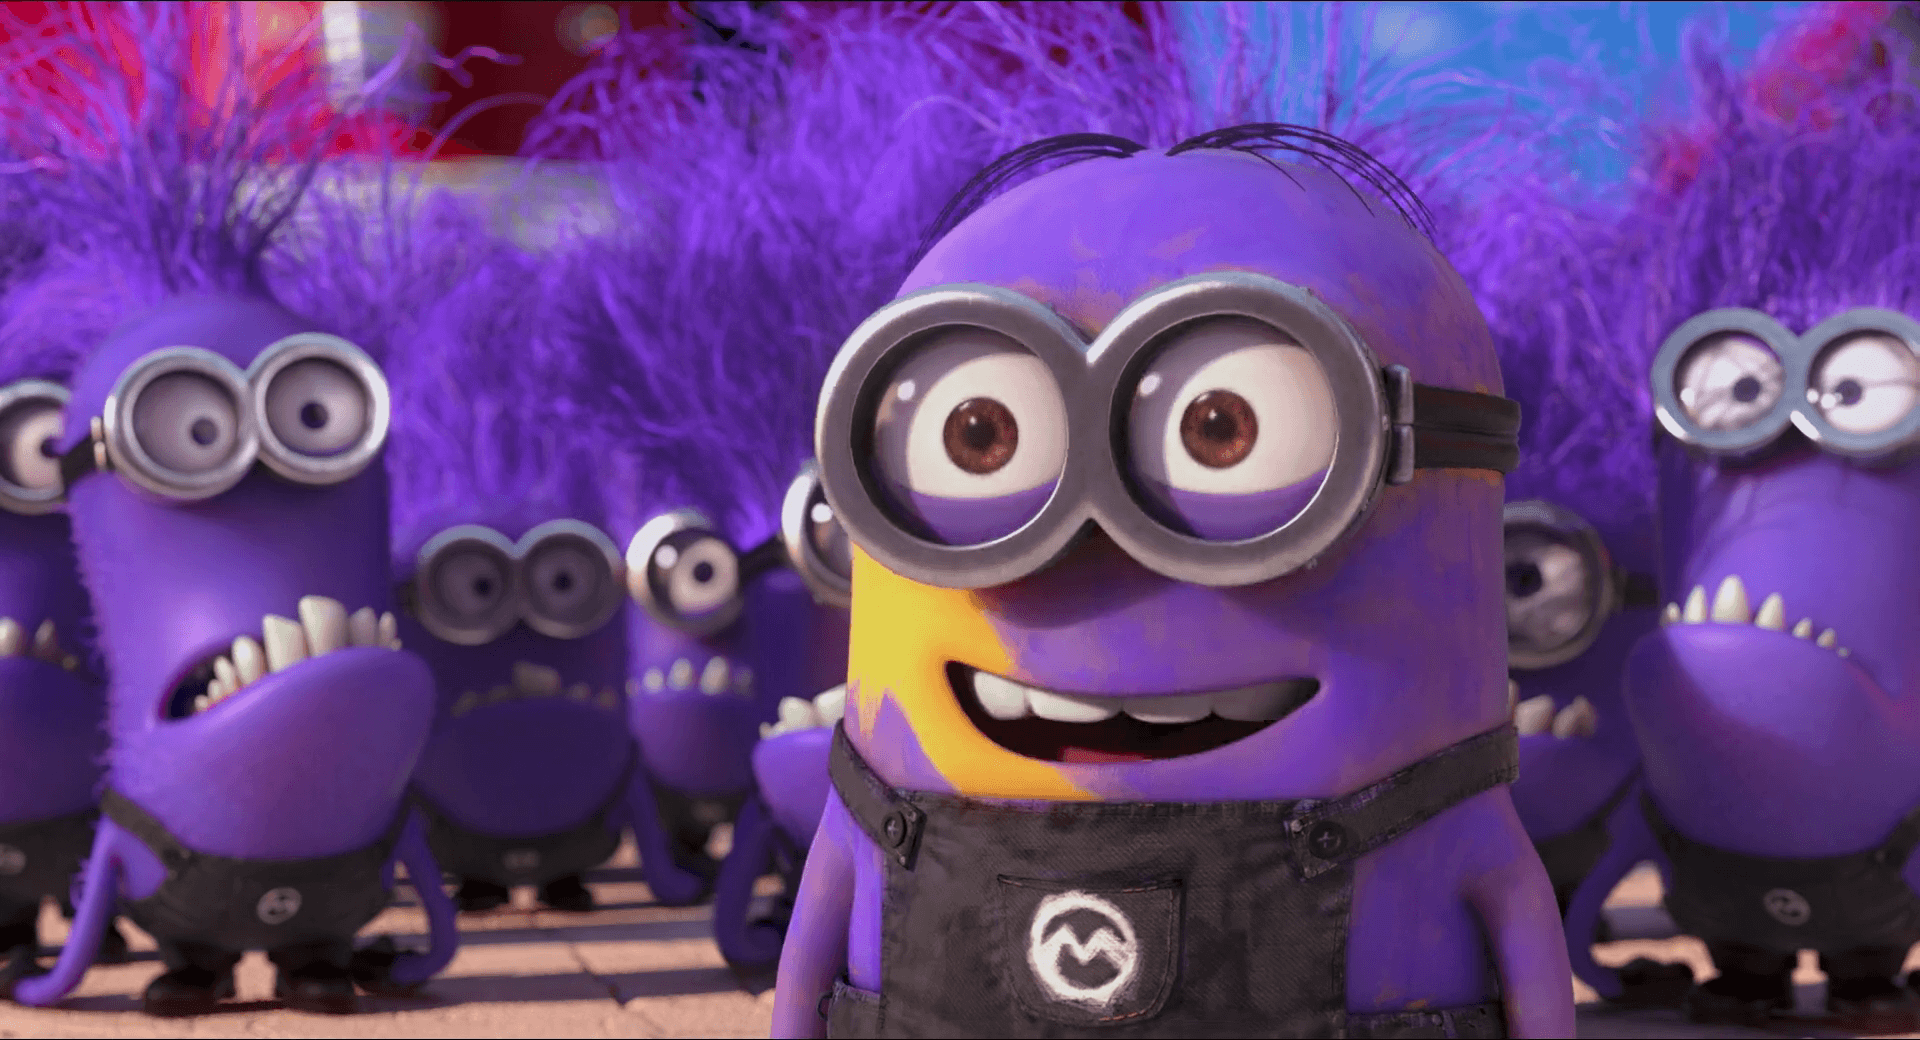 Purple Minion Logo - List of Synonyms and Antonyms of the Word: m evil minion